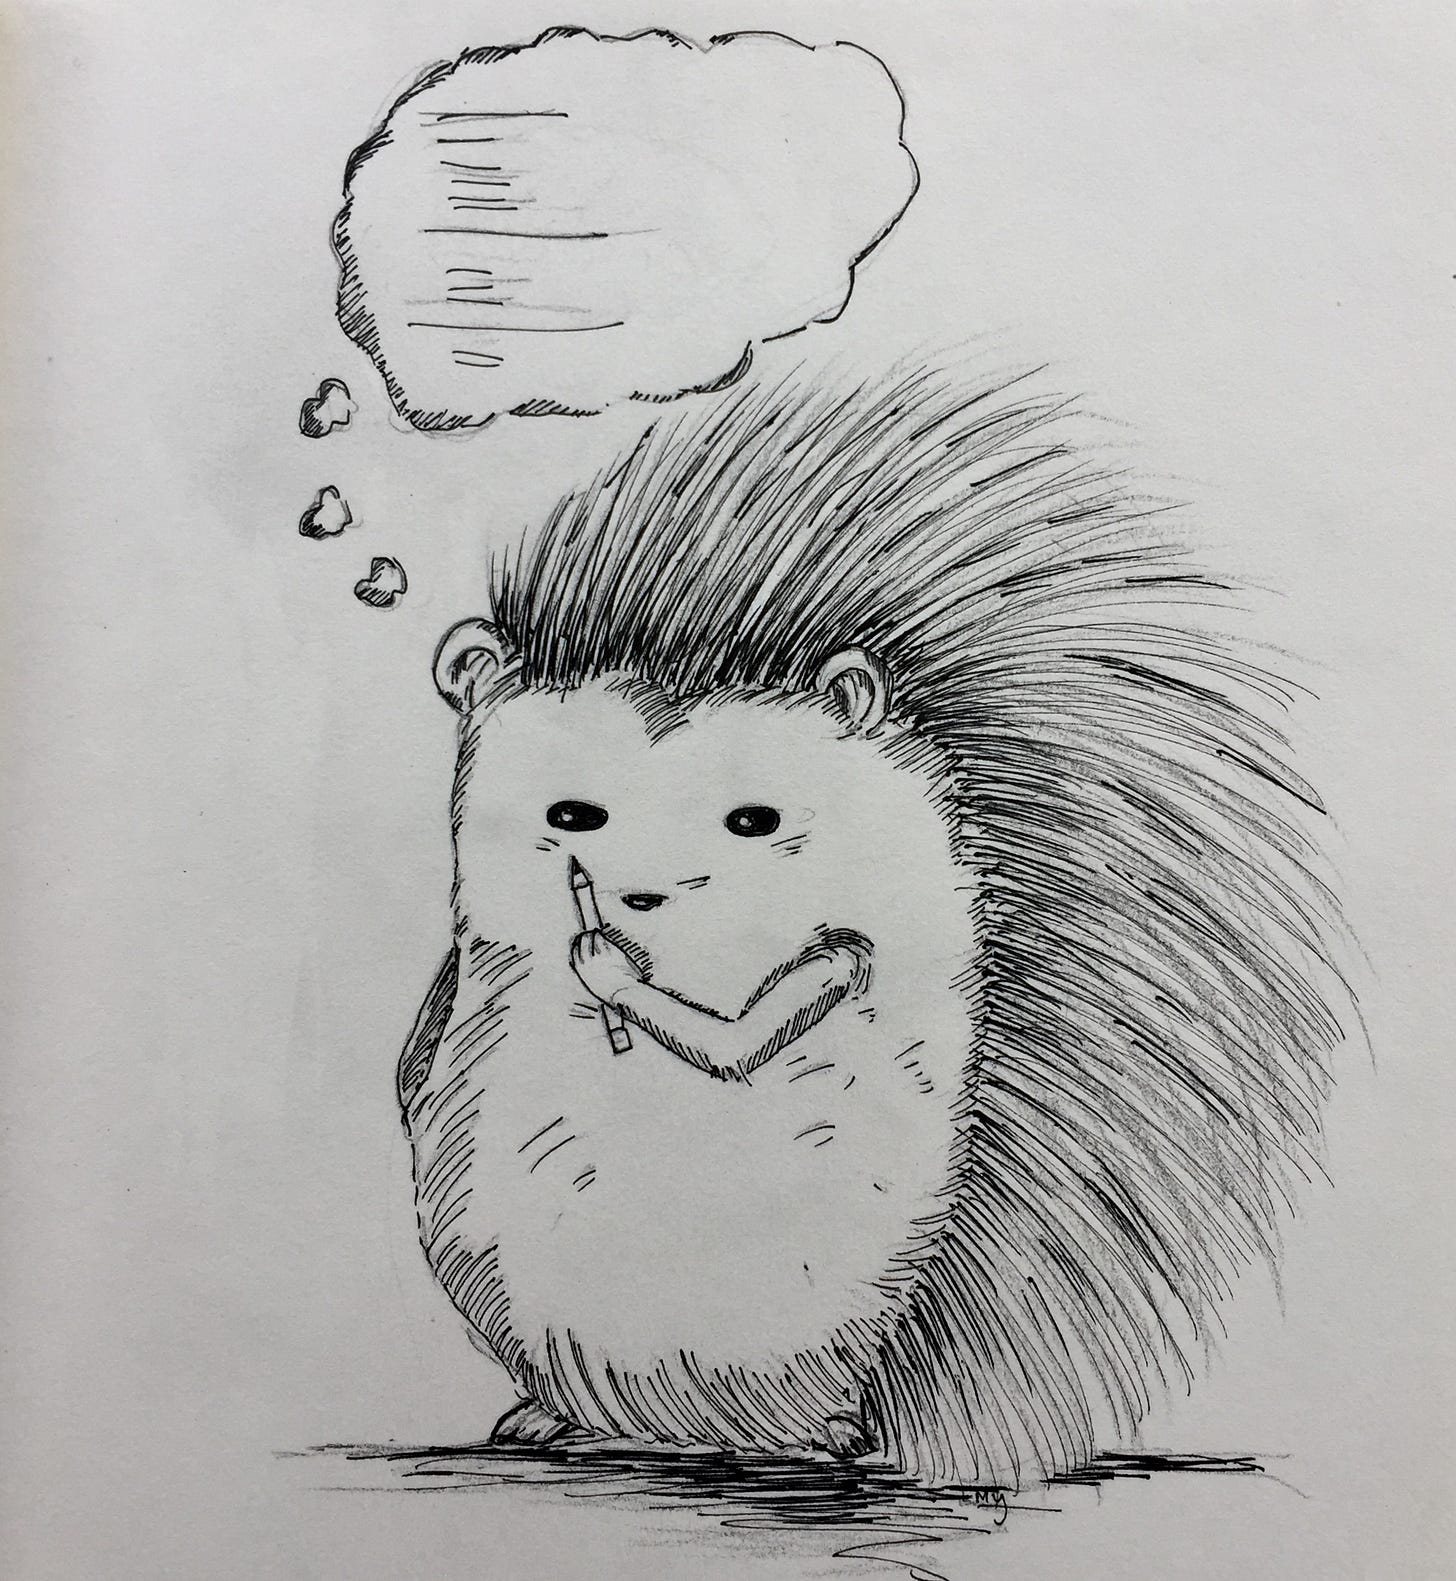 Ink and pencil drawing of a porcupine holding a pencil, with a thought bubble above his head. A cartoon porcupine